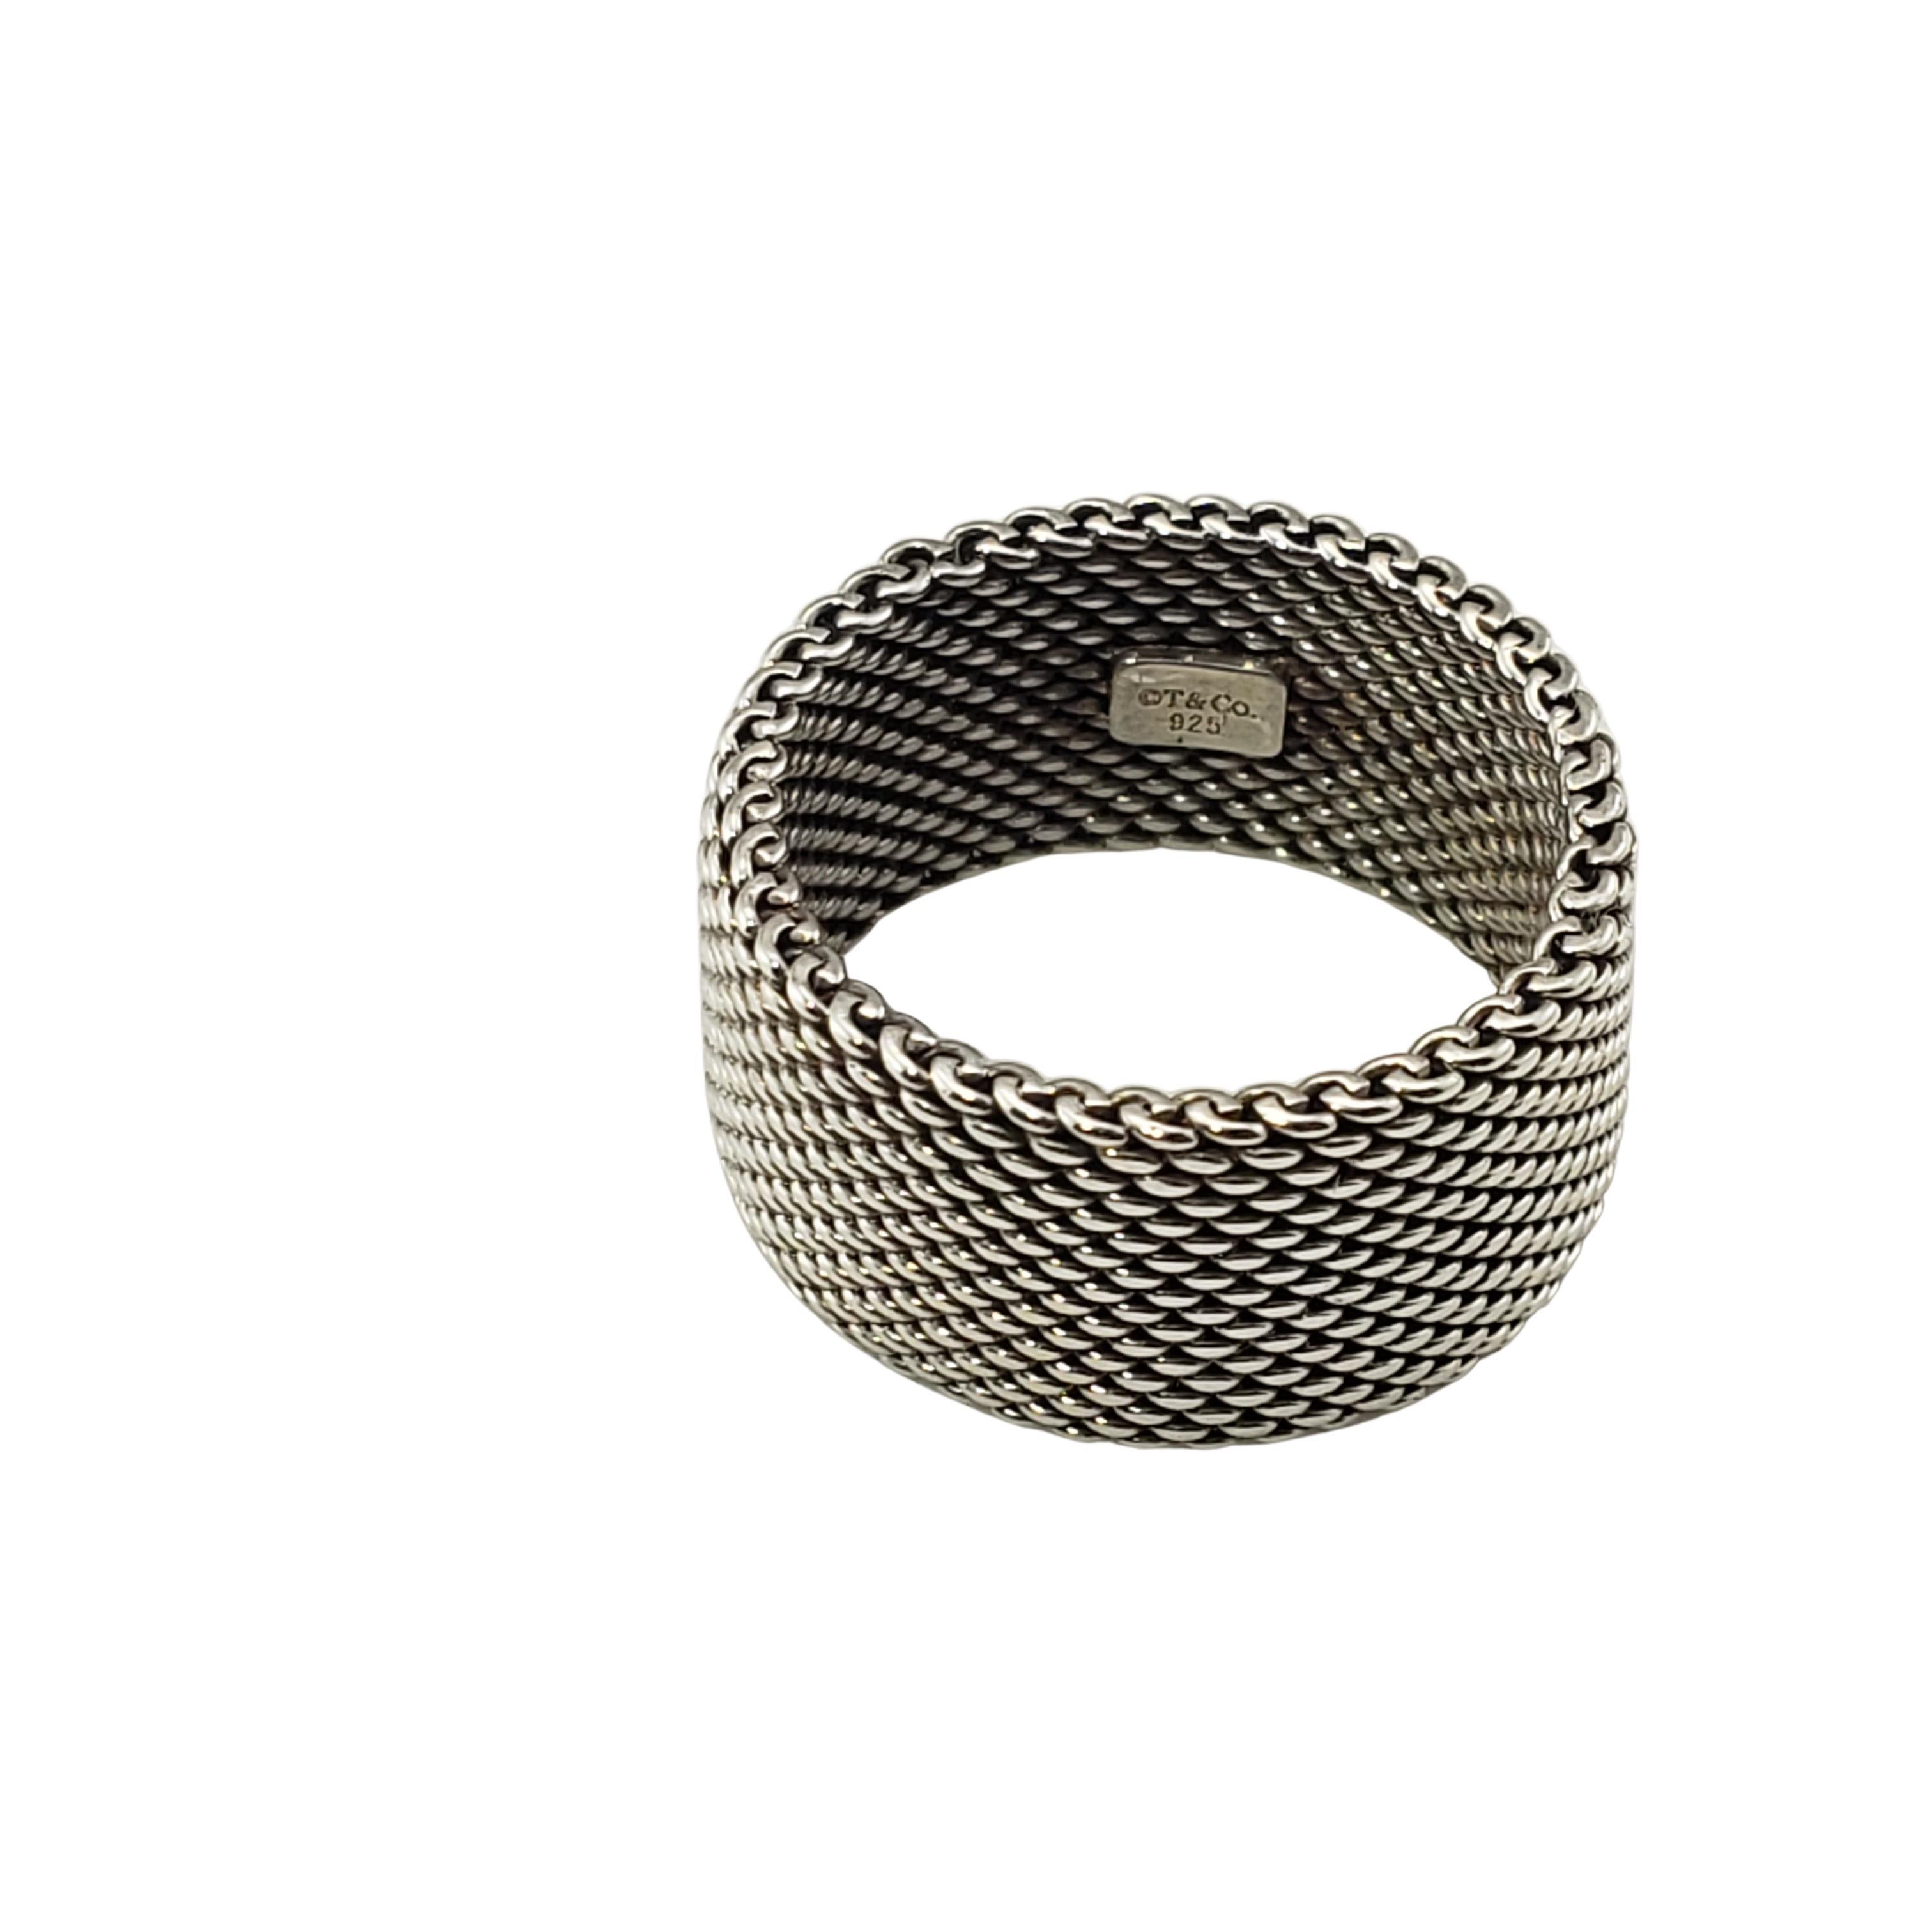 Vintage Tiffany & Co Sterling Silver Mesh Ring Size 5.5-

This lovely mesh band by Tiffany & Co is crafted in beautifully detailed sterling silver (mesh is not flexible). Width: 9 mm.

Size: 5.5

Weight: 3.2 dwt. / 5.1 gr.

Hallmark: T & CO.